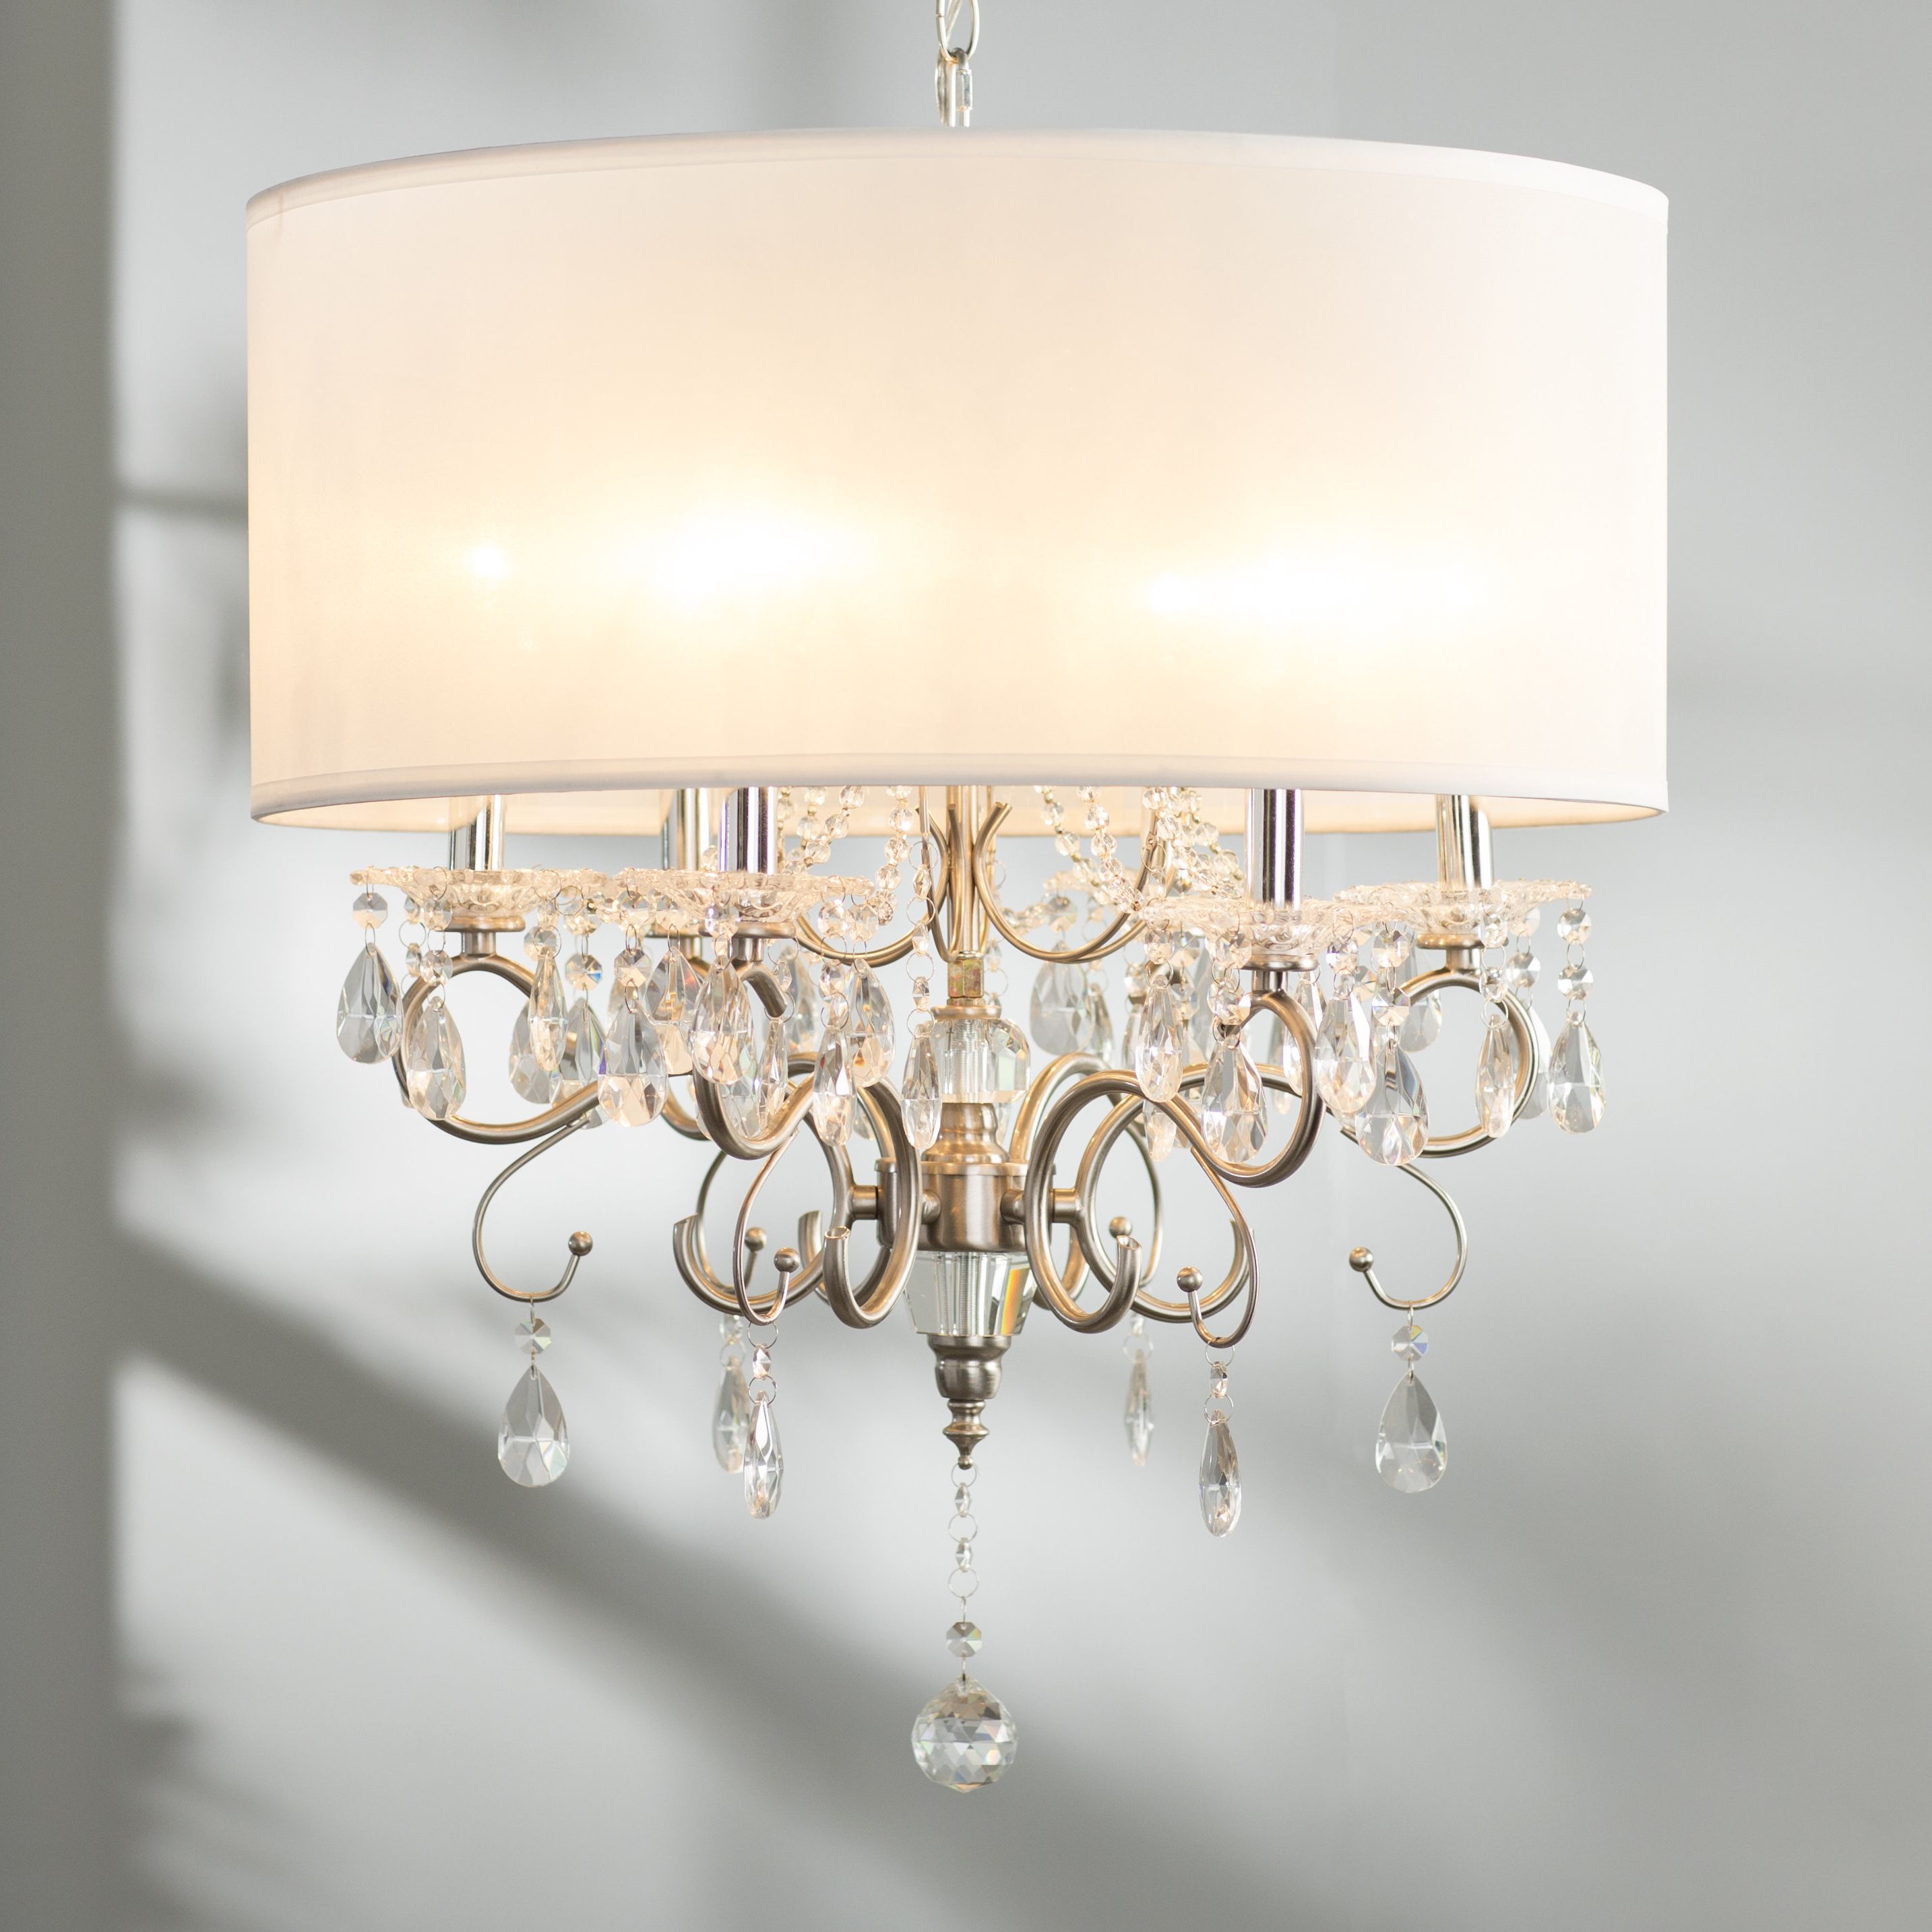 [%Drum Chandeliers Sale – Up To 65% Off Until September 30Th For Favorite Wadlington 5 Light Drum Chandeliers|Wadlington 5 Light Drum Chandeliers Inside Trendy Drum Chandeliers Sale – Up To 65% Off Until September 30Th|Widely Used Wadlington 5 Light Drum Chandeliers Within Drum Chandeliers Sale – Up To 65% Off Until September 30Th|Recent Drum Chandeliers Sale – Up To 65% Off Until September 30Th For Wadlington 5 Light Drum Chandeliers%] (View 12 of 25)